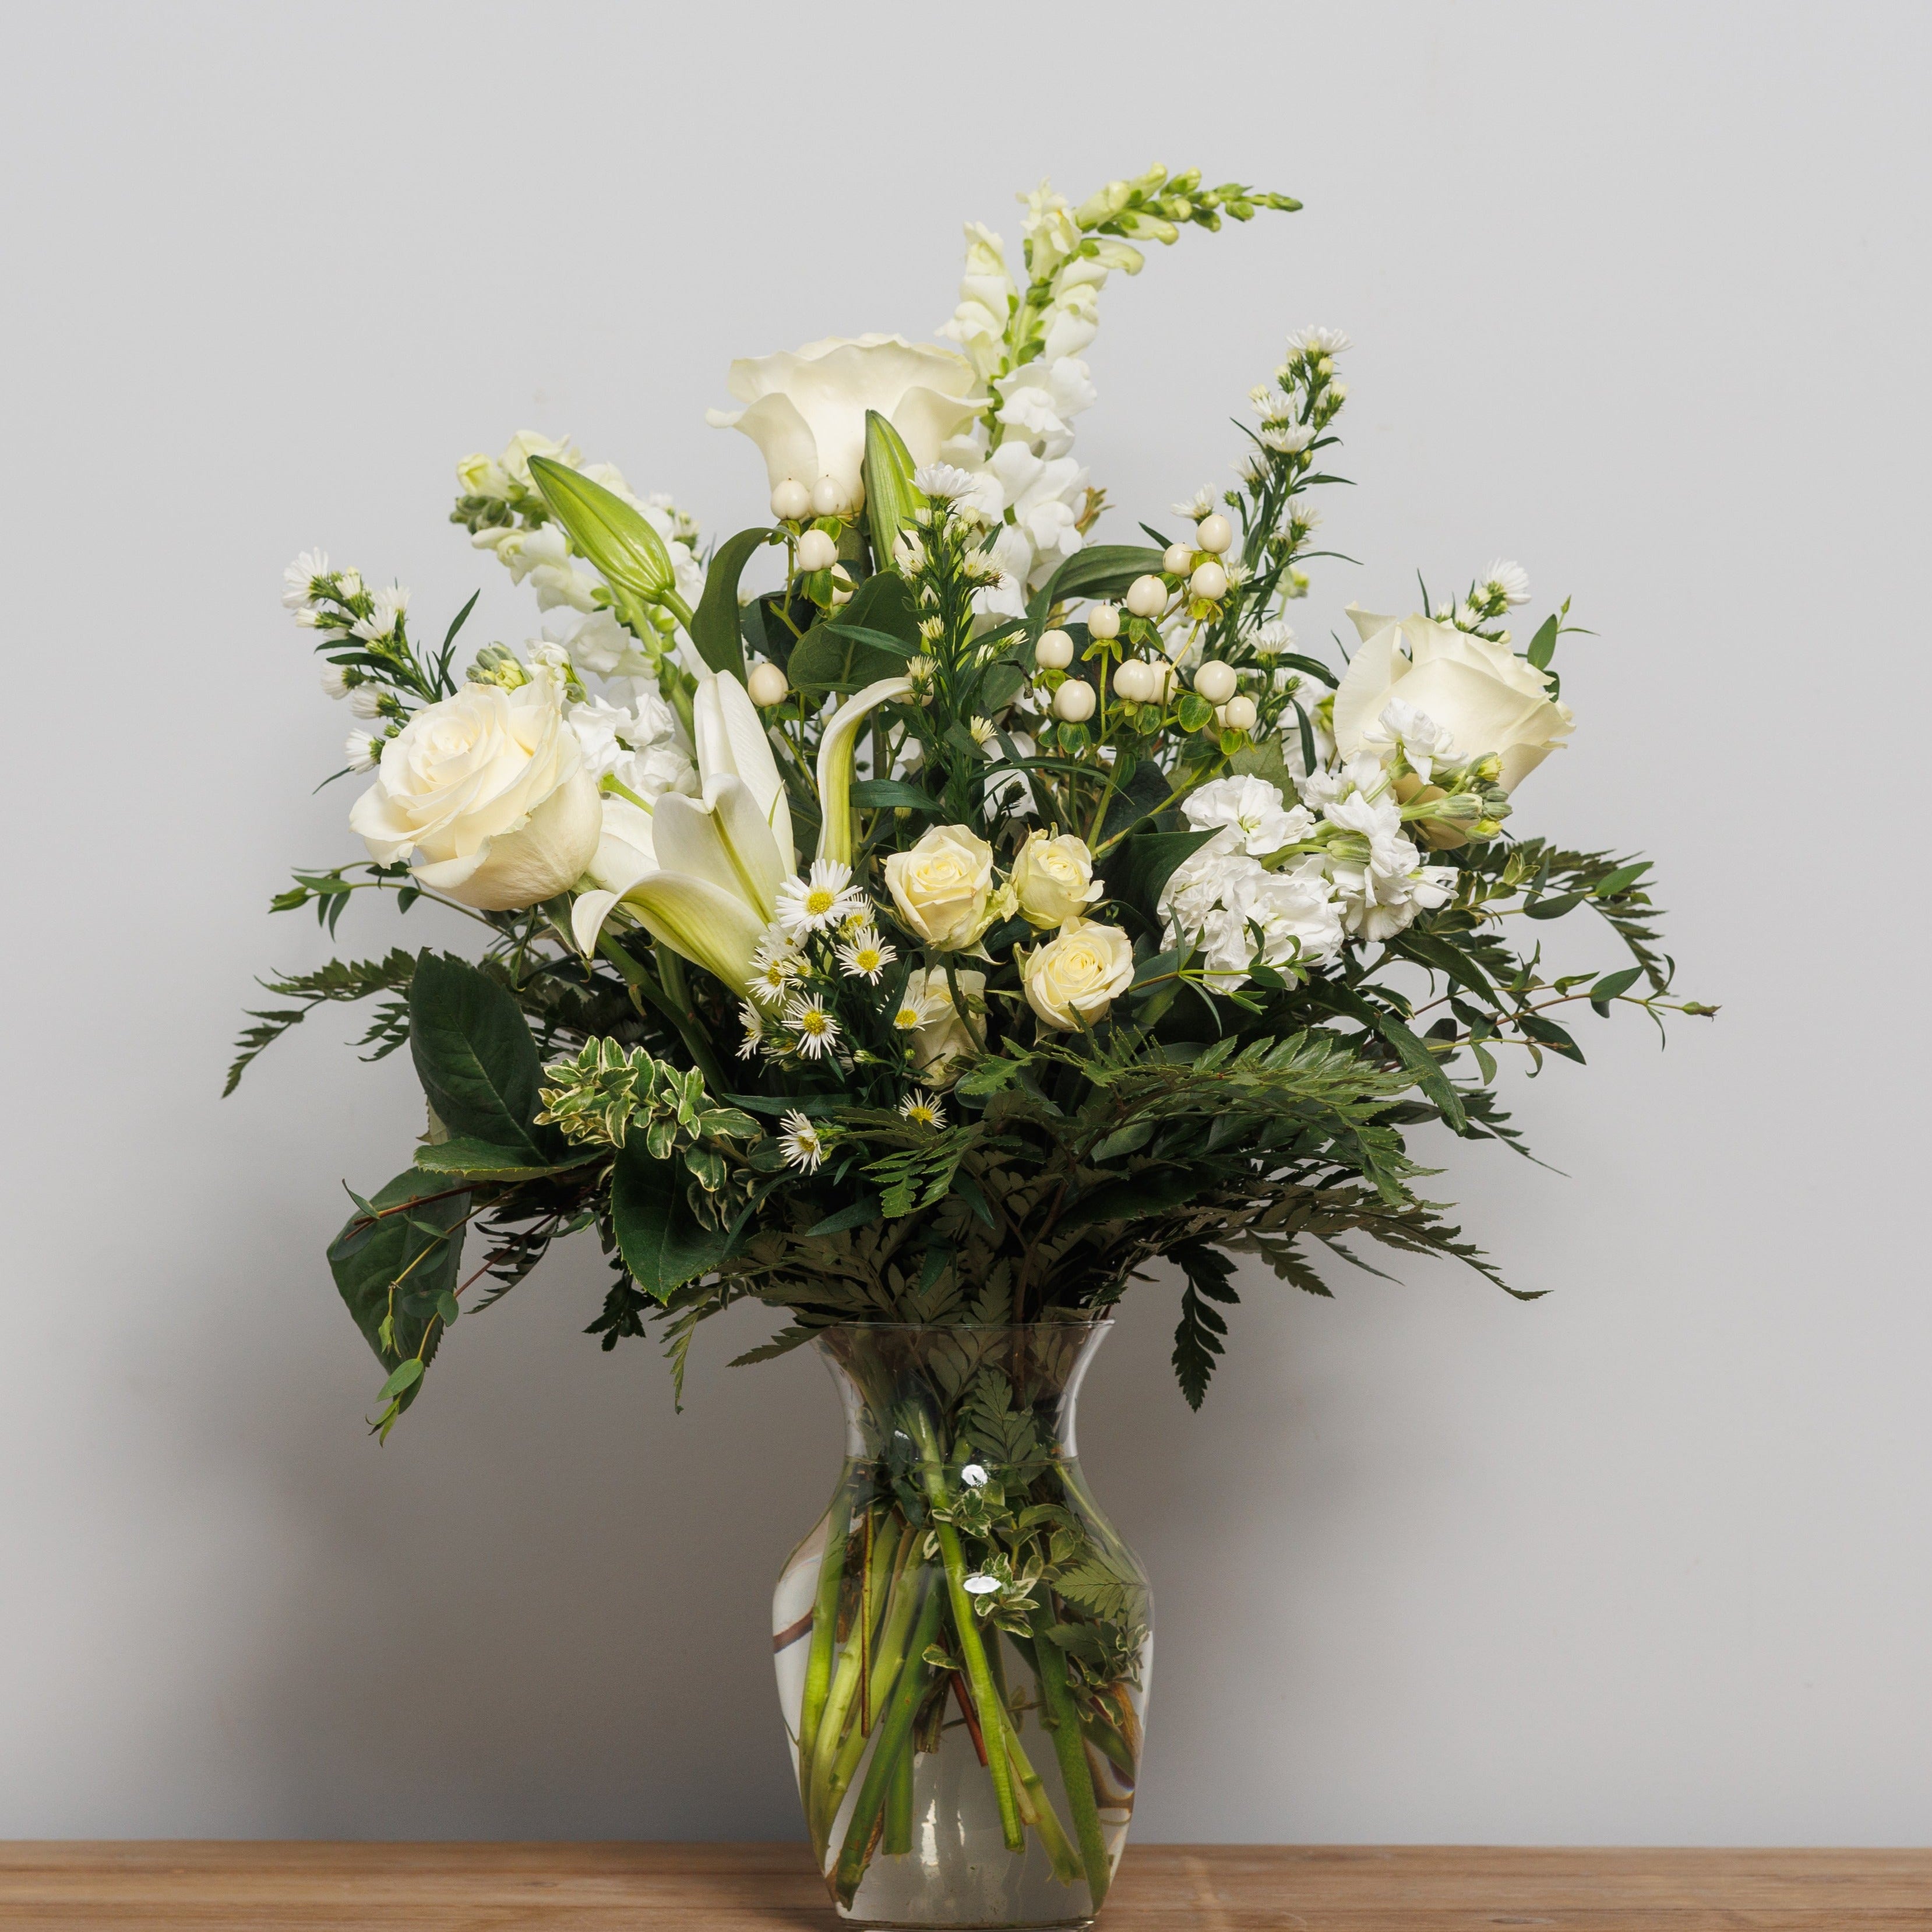 A vase arrangement with all cream colored flowers.